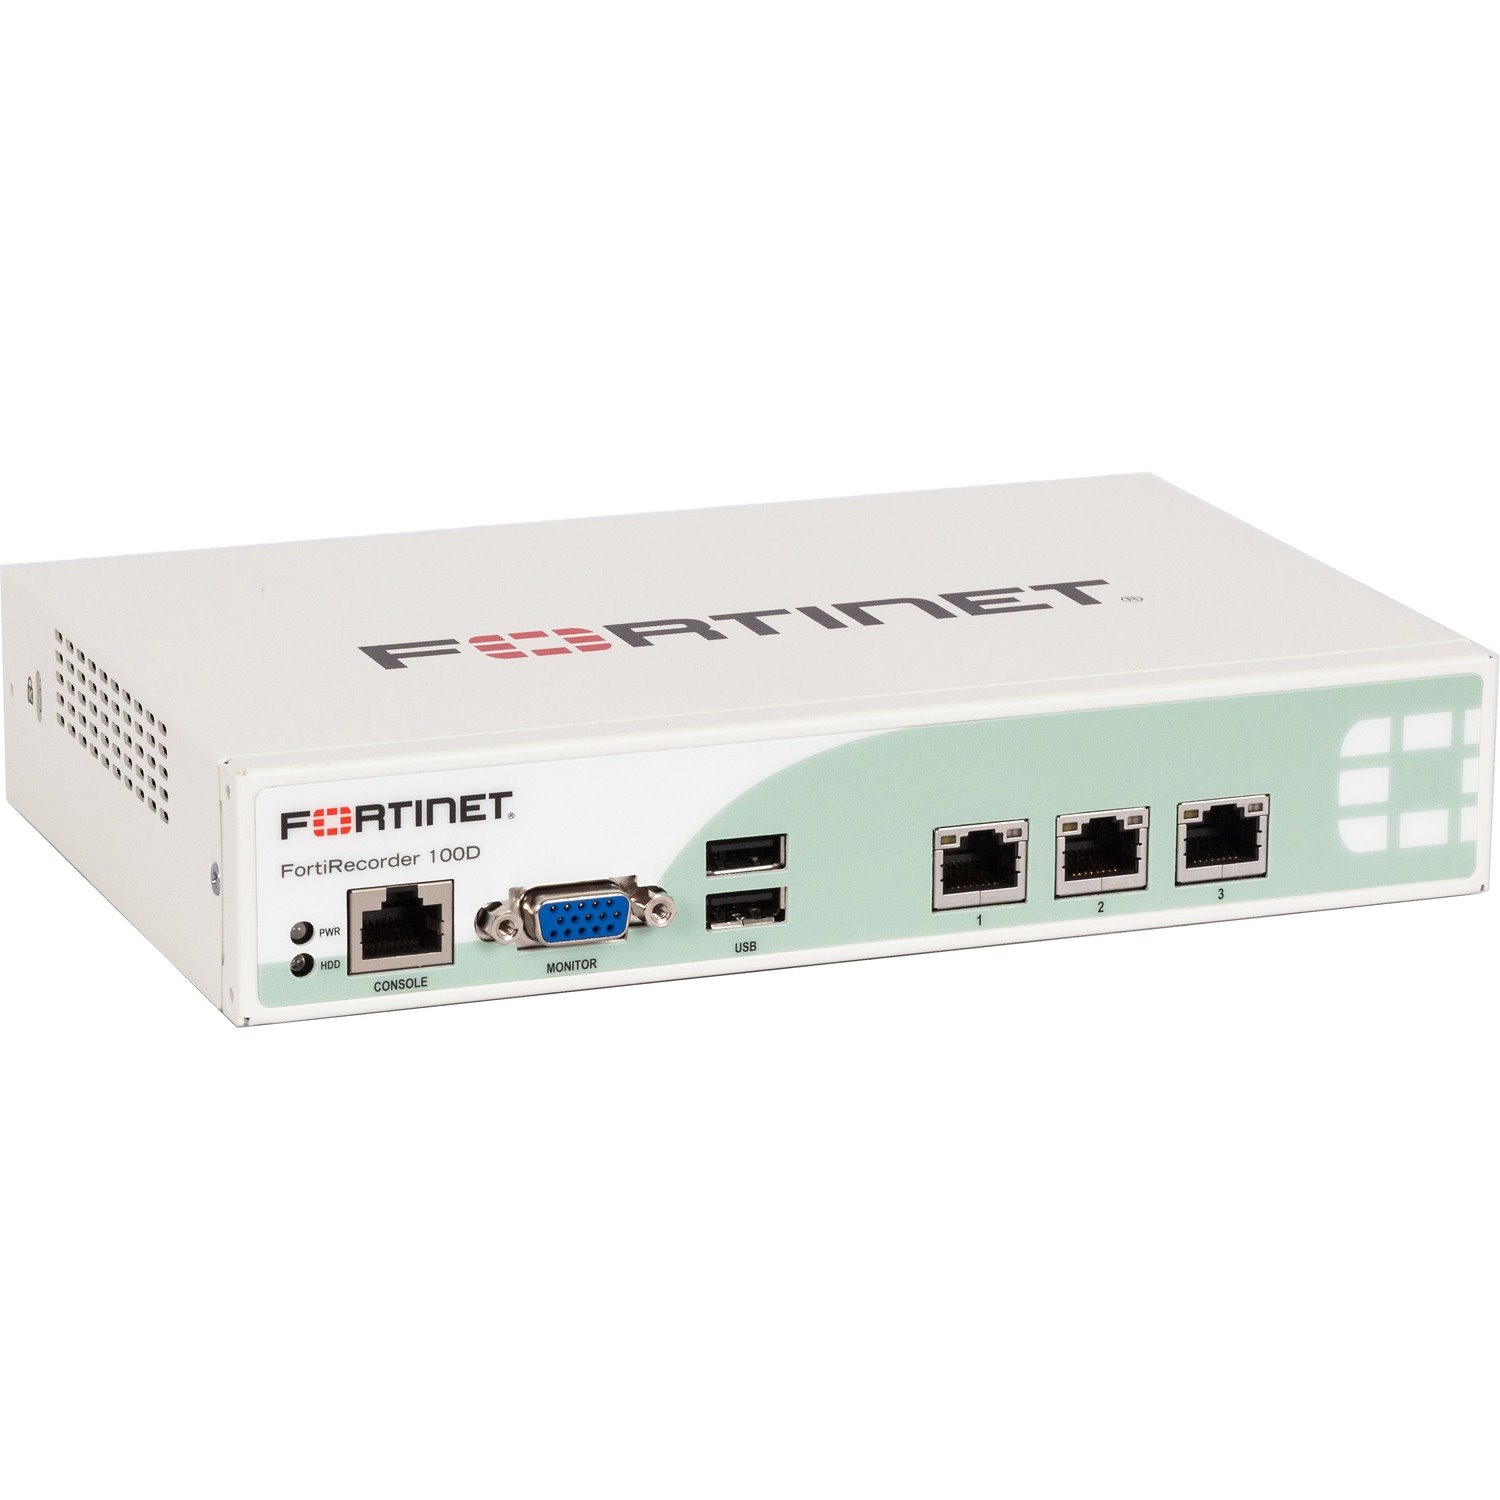 Fortinet FortiRecorder 100D NVR - 1 TB HDD